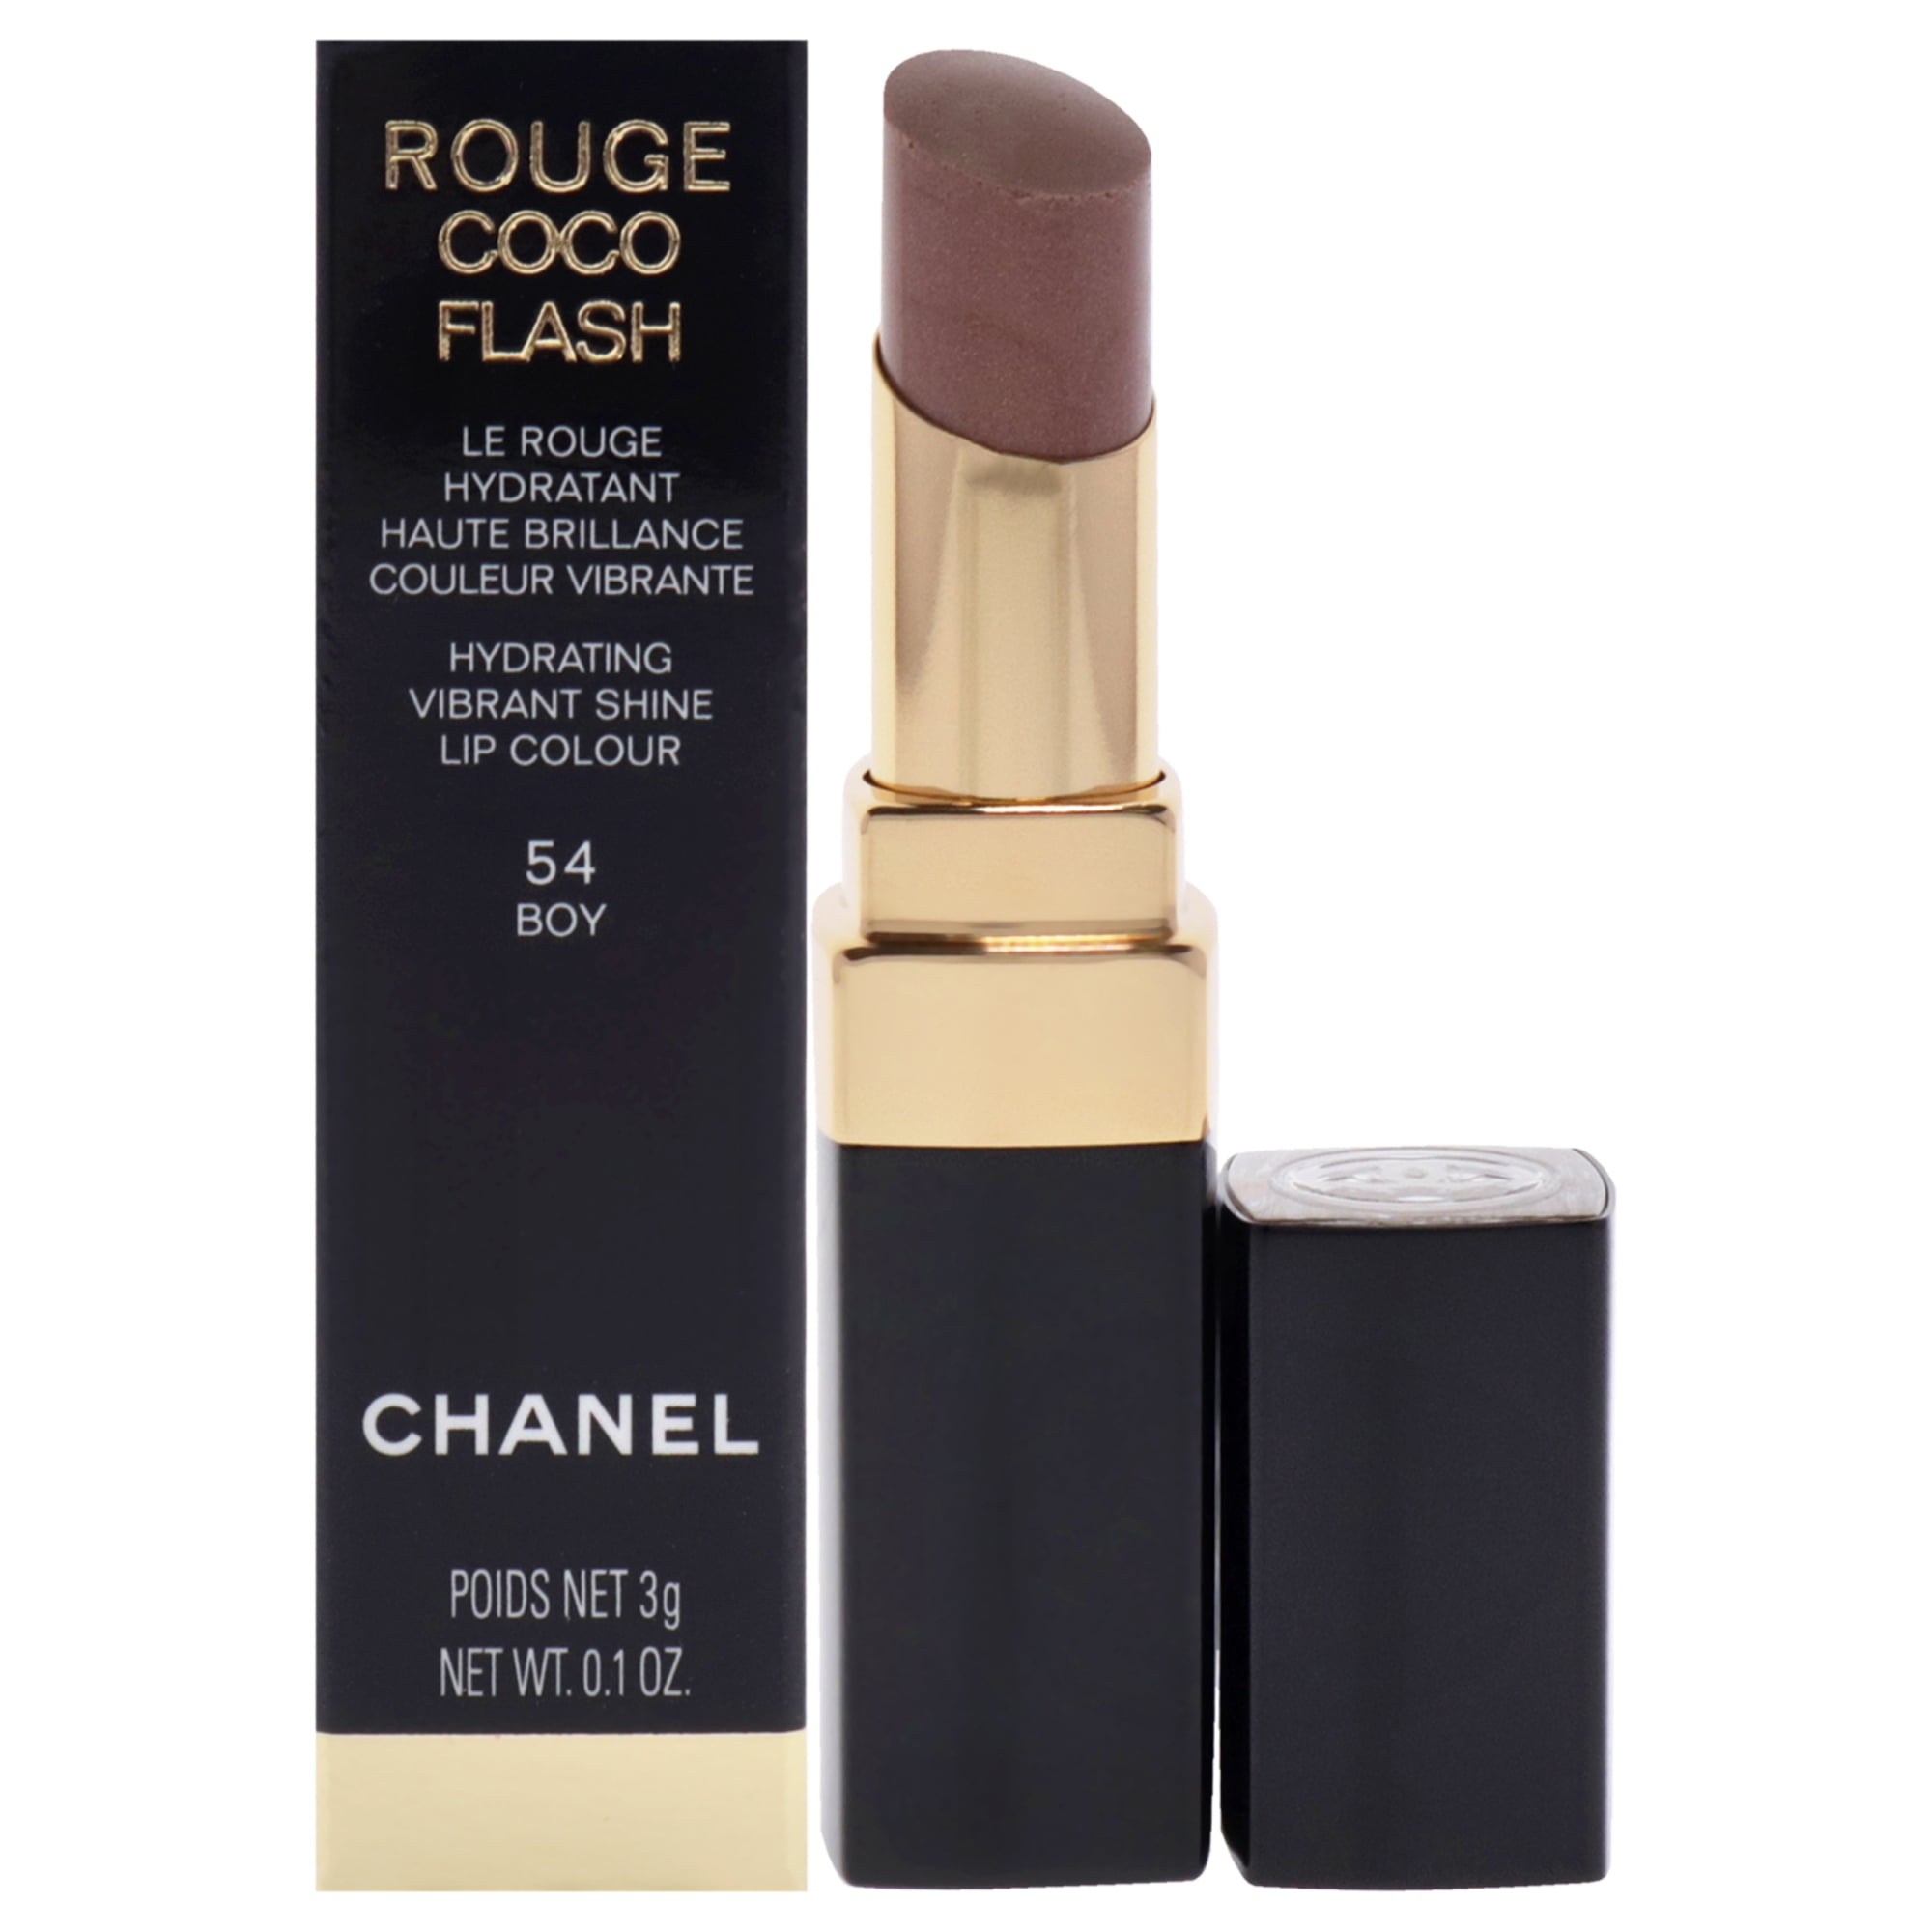  Chanel Les Beiges Healthy Glow Lip Balm - Light By Chanel for  Women - 0.1 Oz Lipstick, 0.1 Ounce : Beauty & Personal Care